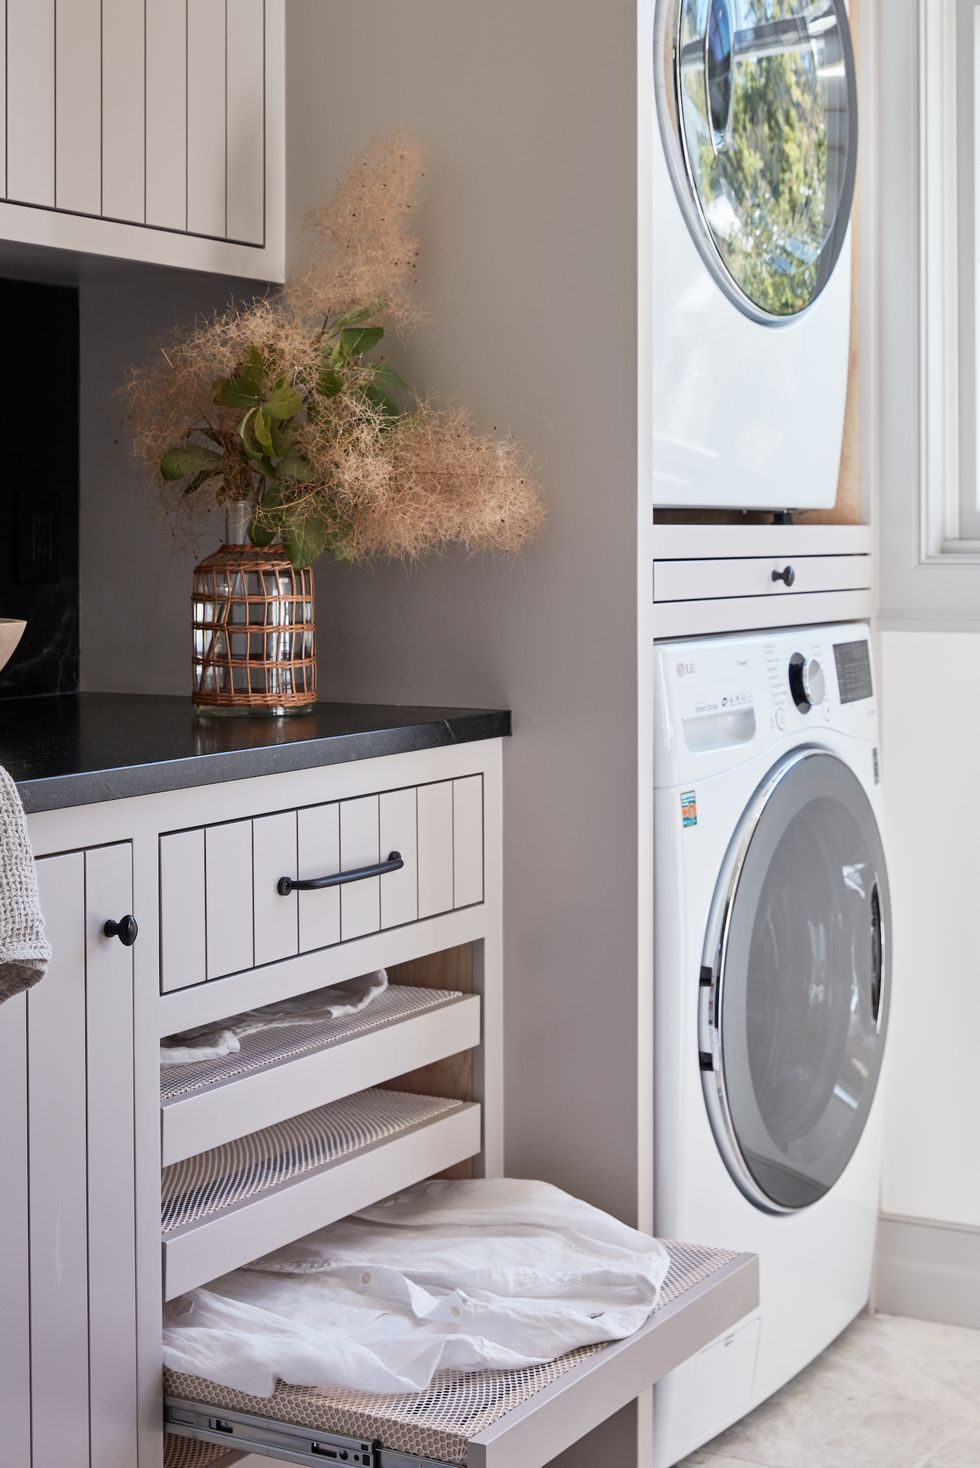 15 laundry room organization ideas to try - TODAY